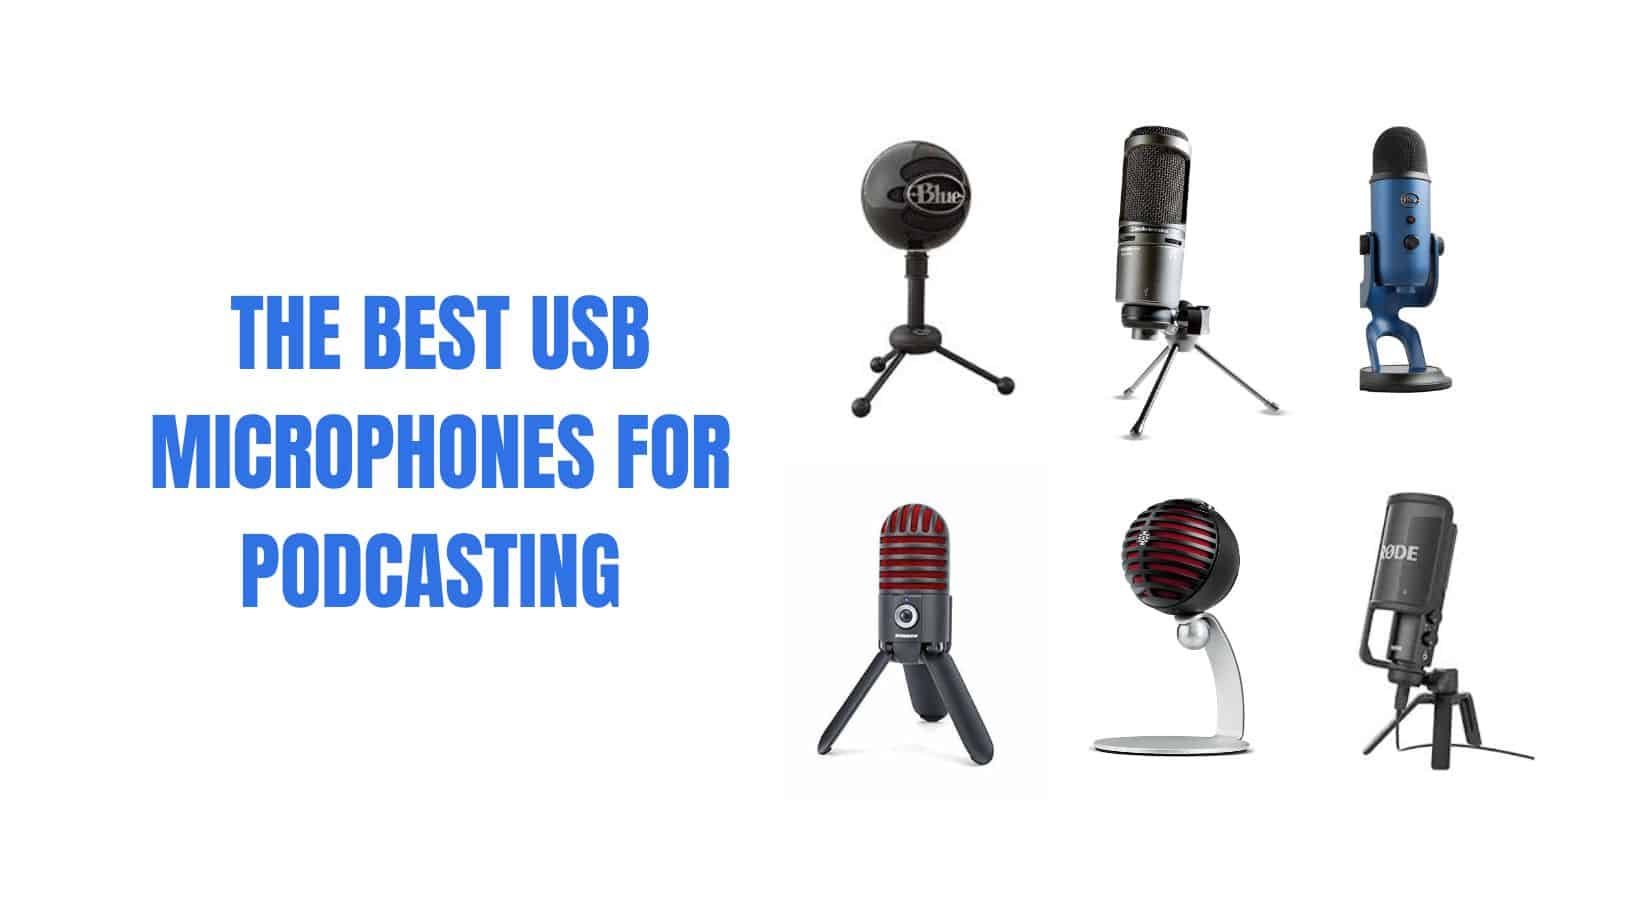 The Best USB Microphones for Podcasting